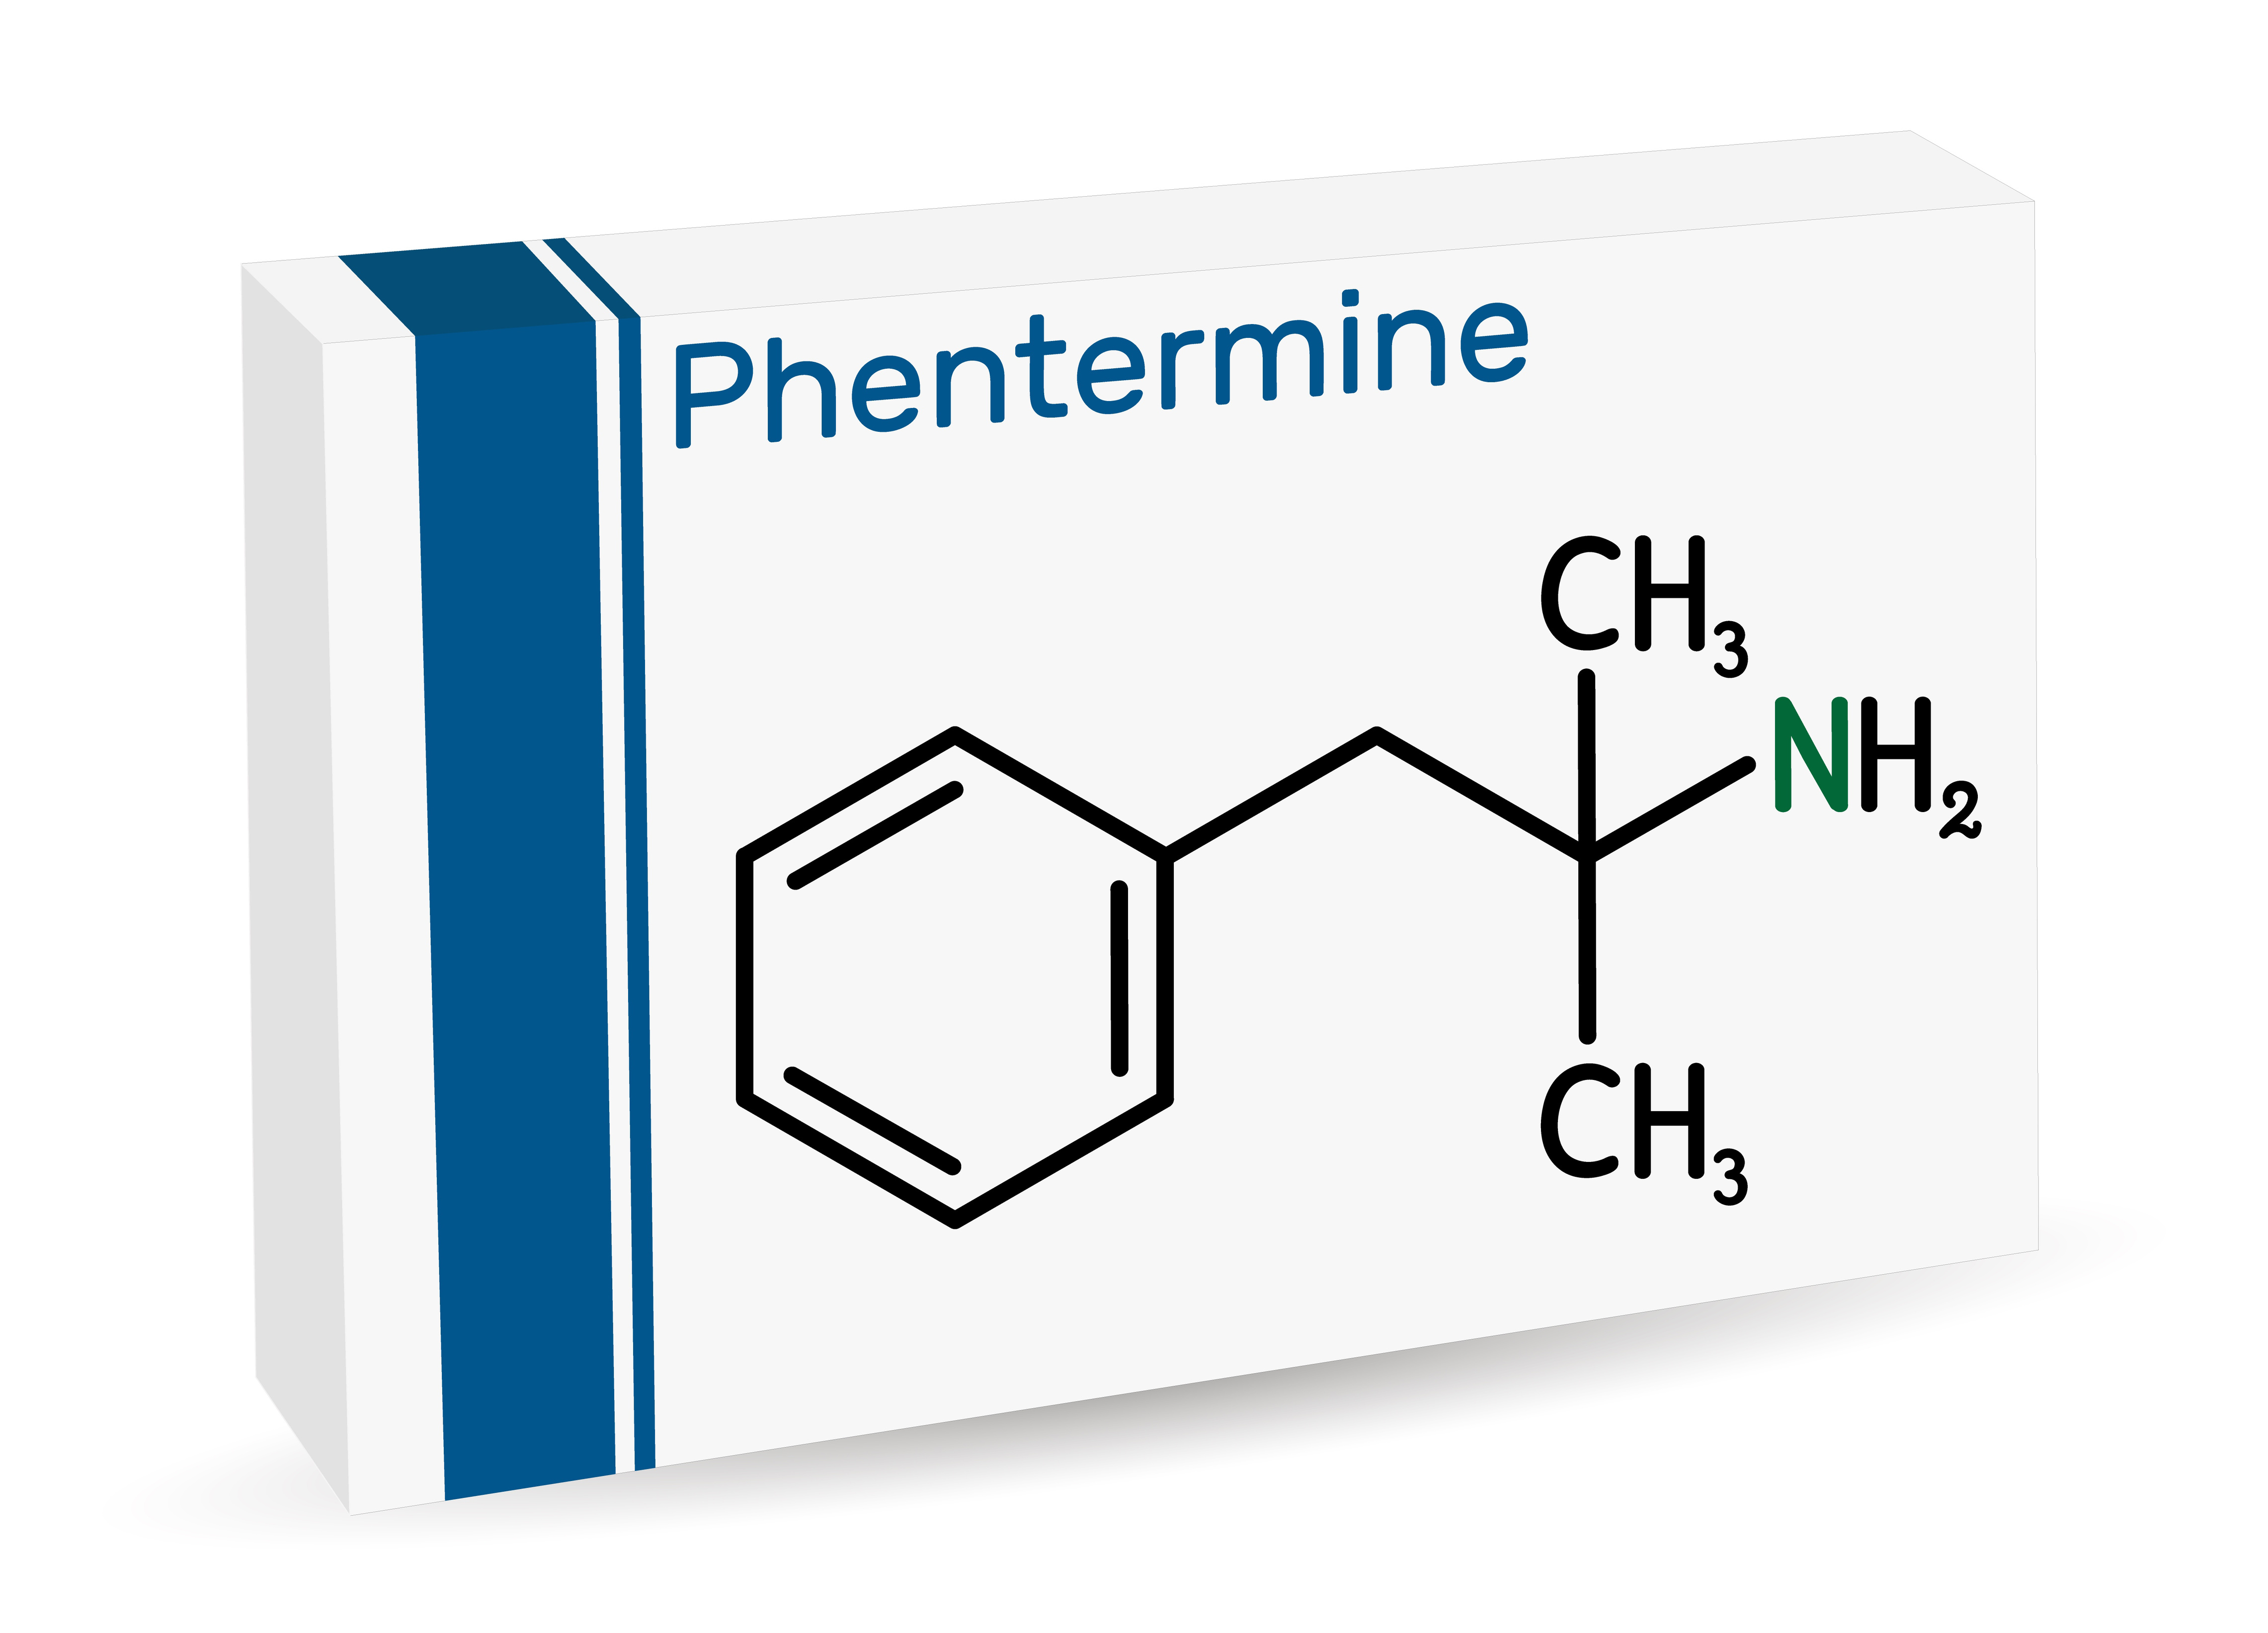 An image of the chemical composition of Phentermine on a medical box.